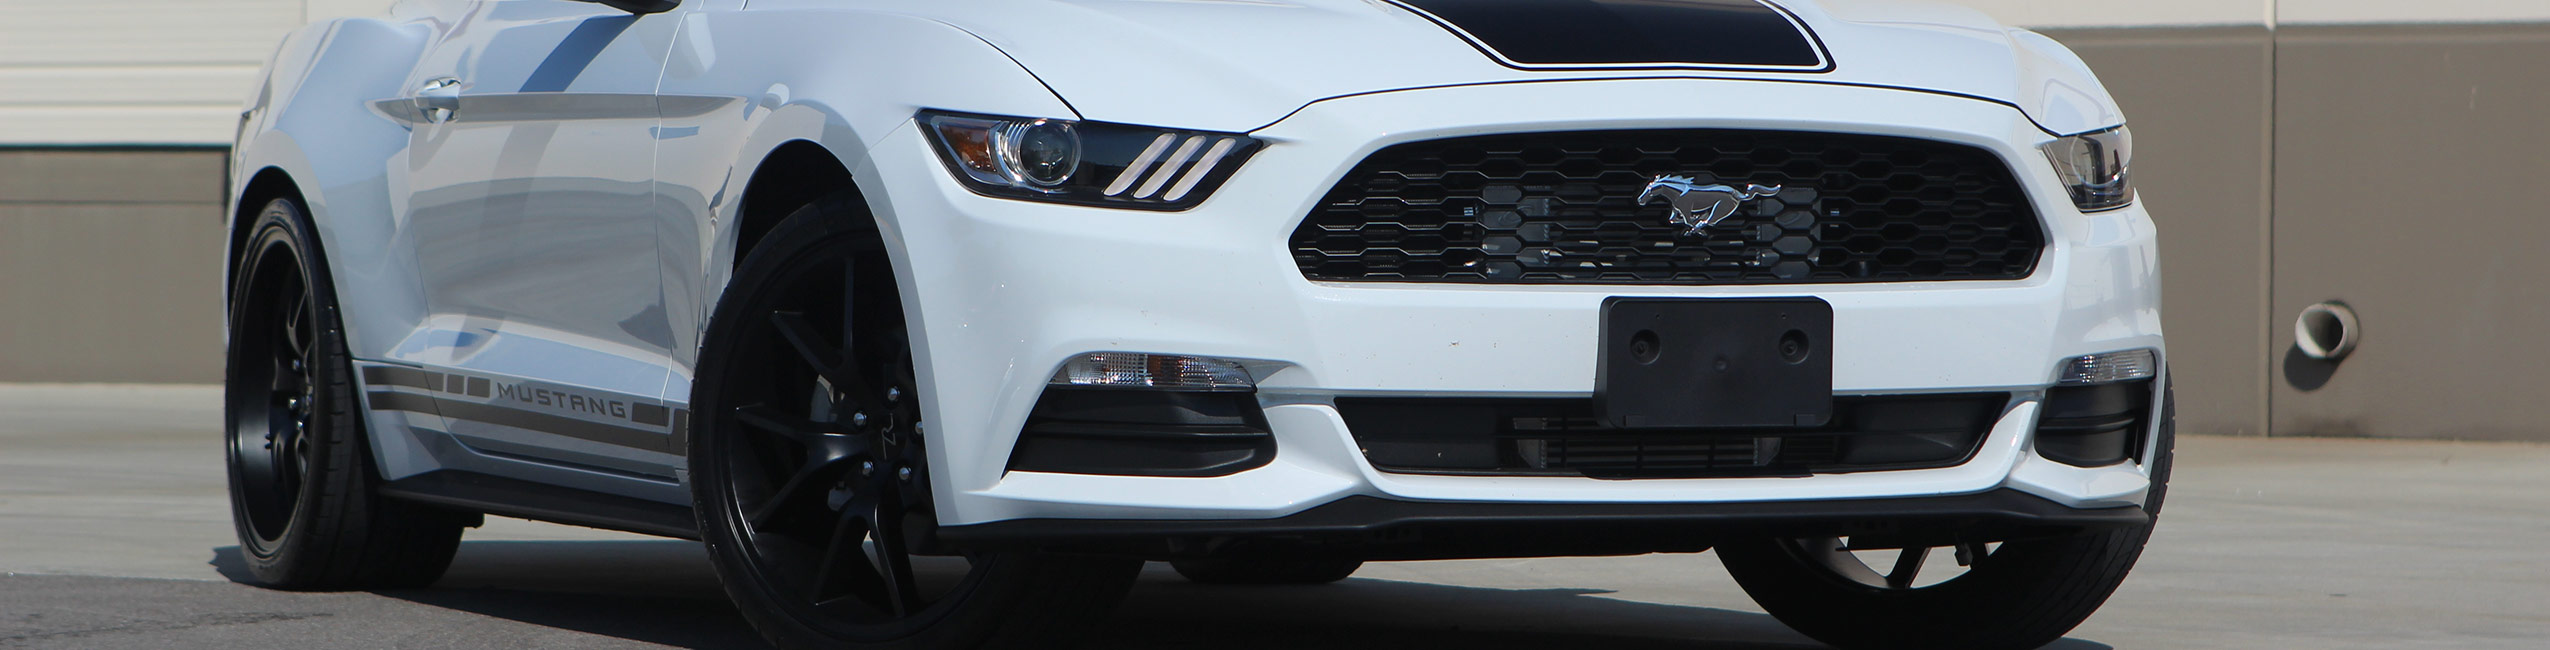 2015 Ford Mustang V6 with ProCharger supercharger